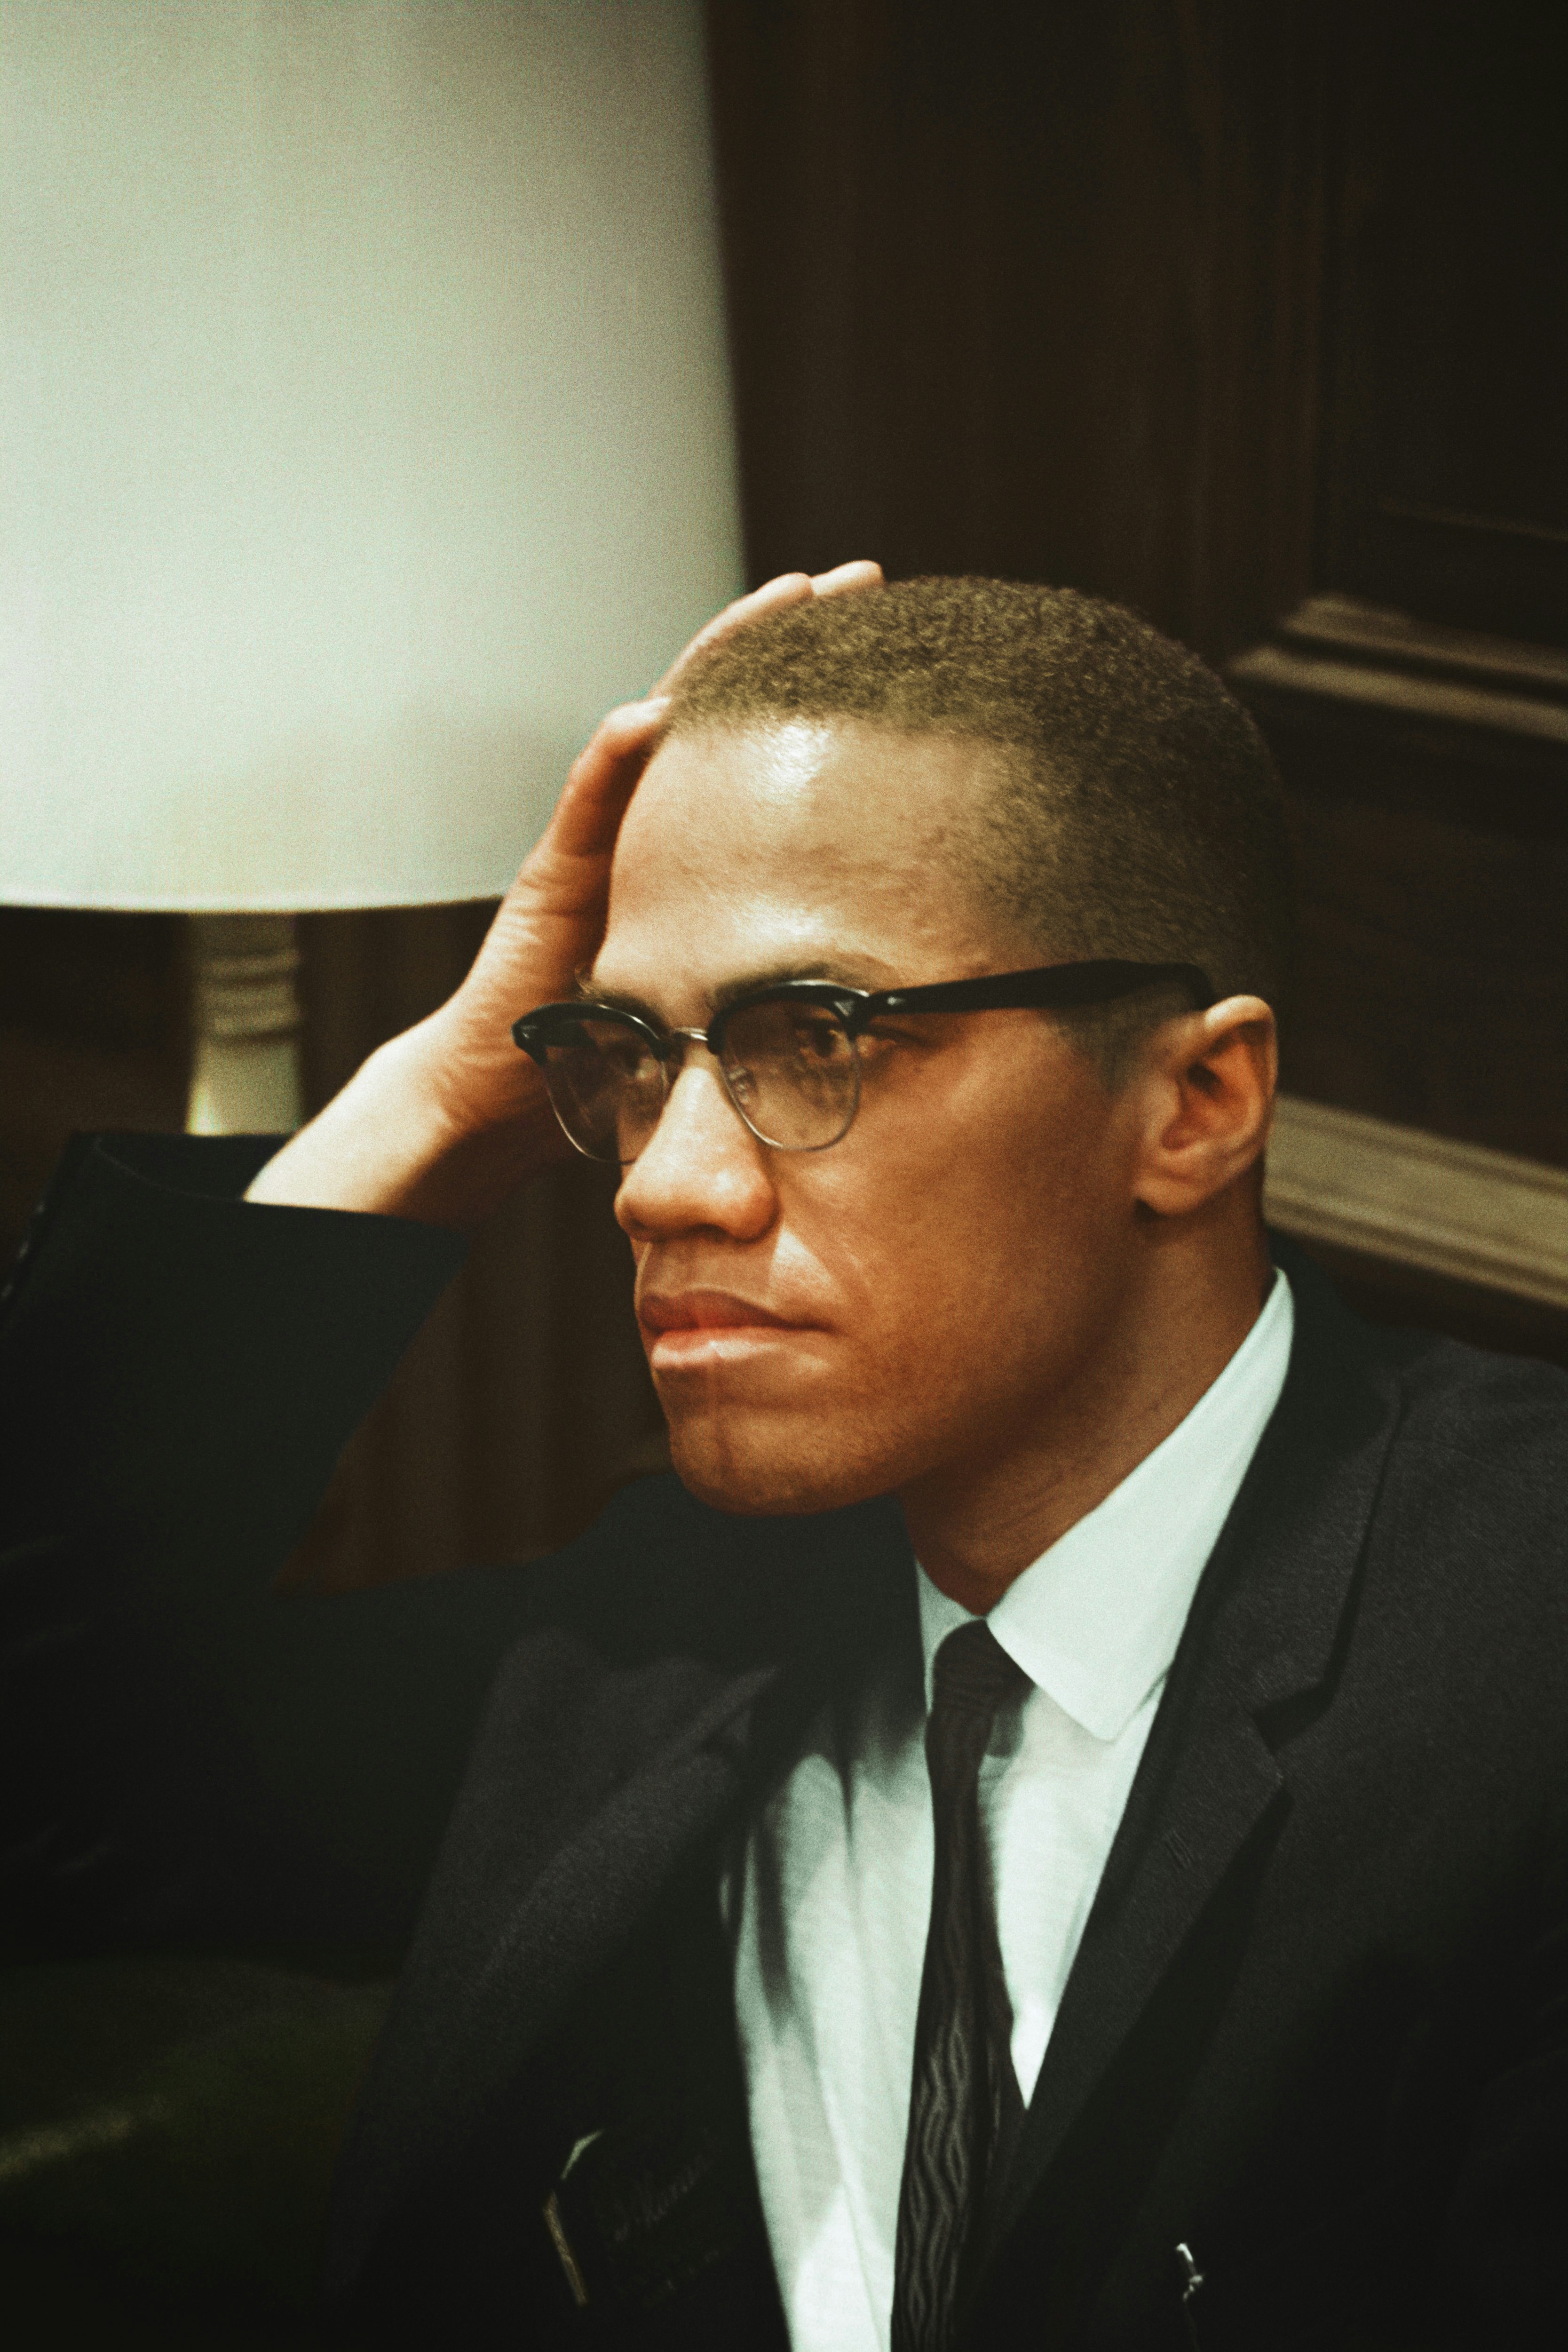 Caption reads, "[Malcolm X waits at Martin Luther King press conference, head-and-shoulders portrait] / [MST]." Original black and white negative by Marion S. Trikosko. Taken March 26th, 1964, Washington D.C, United States (@libraryofcongress). Colorized by Jordan J. Lloyd. Library of Congress Prints and Photographs Division Washington, D.C. 20540 https://www.loc.gov/item/2003688131/